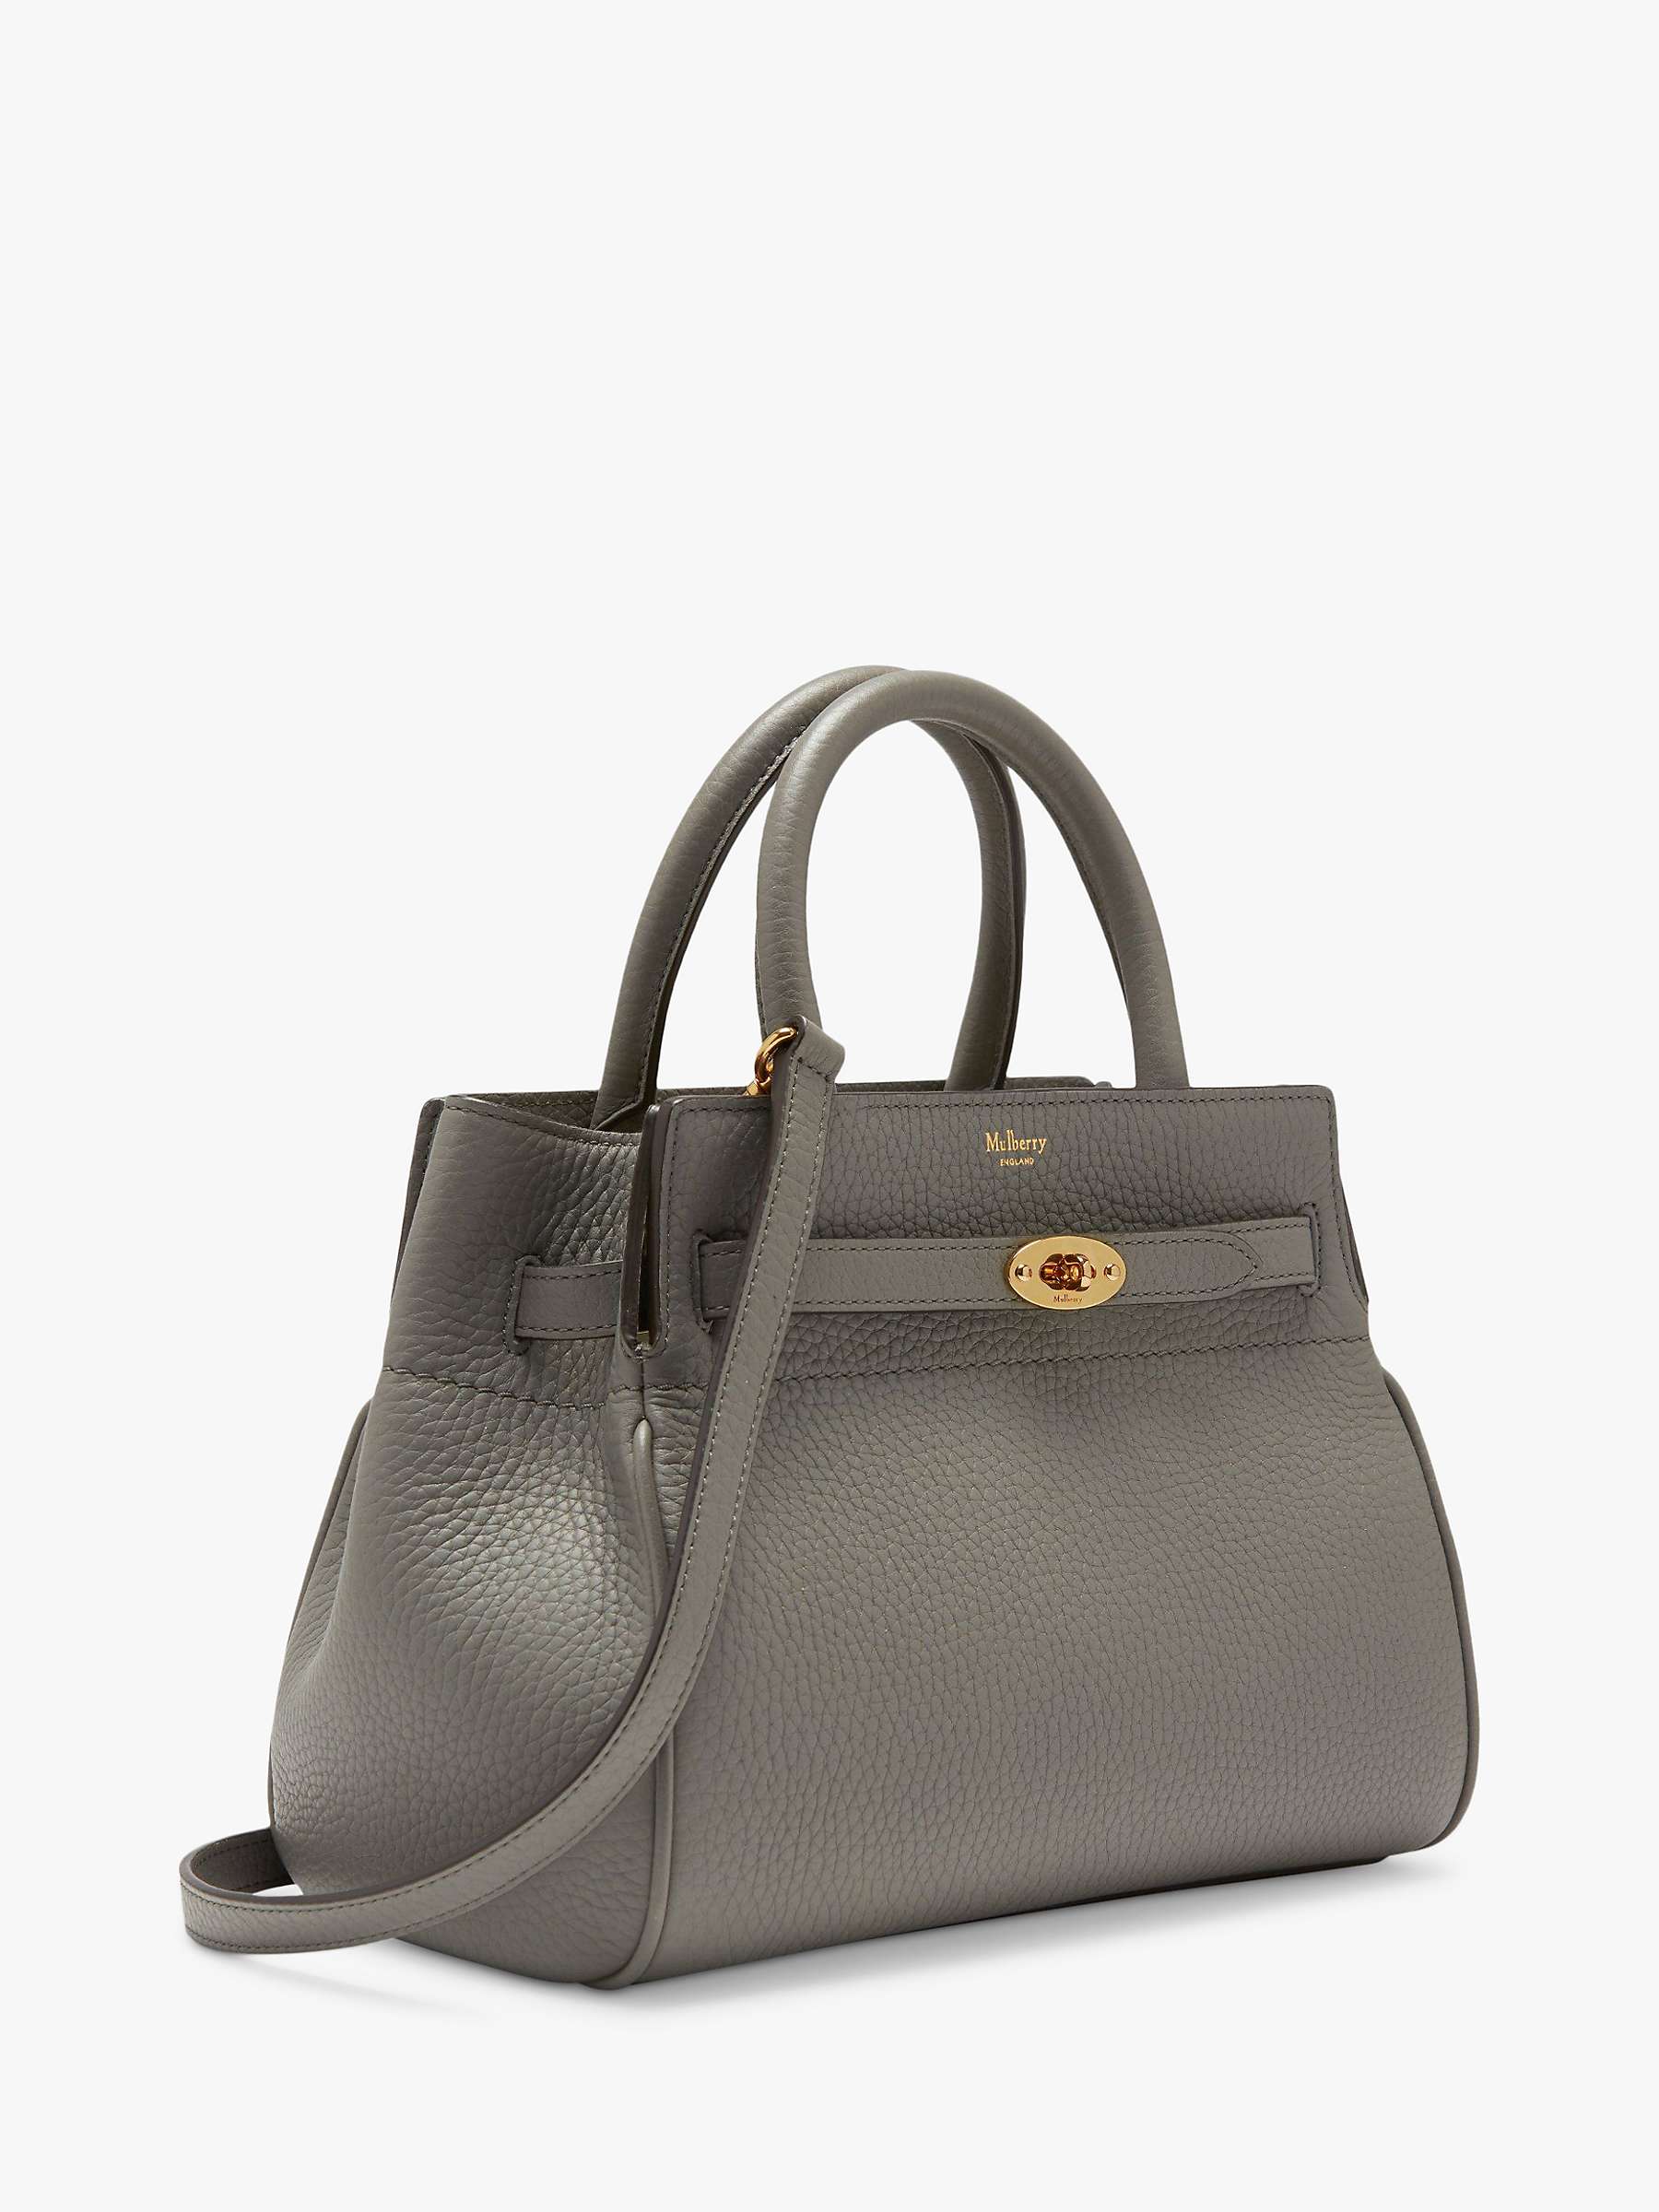 Mulberry Small Belted Bayswater Heavy Grain Leather Handbag, Charcoal